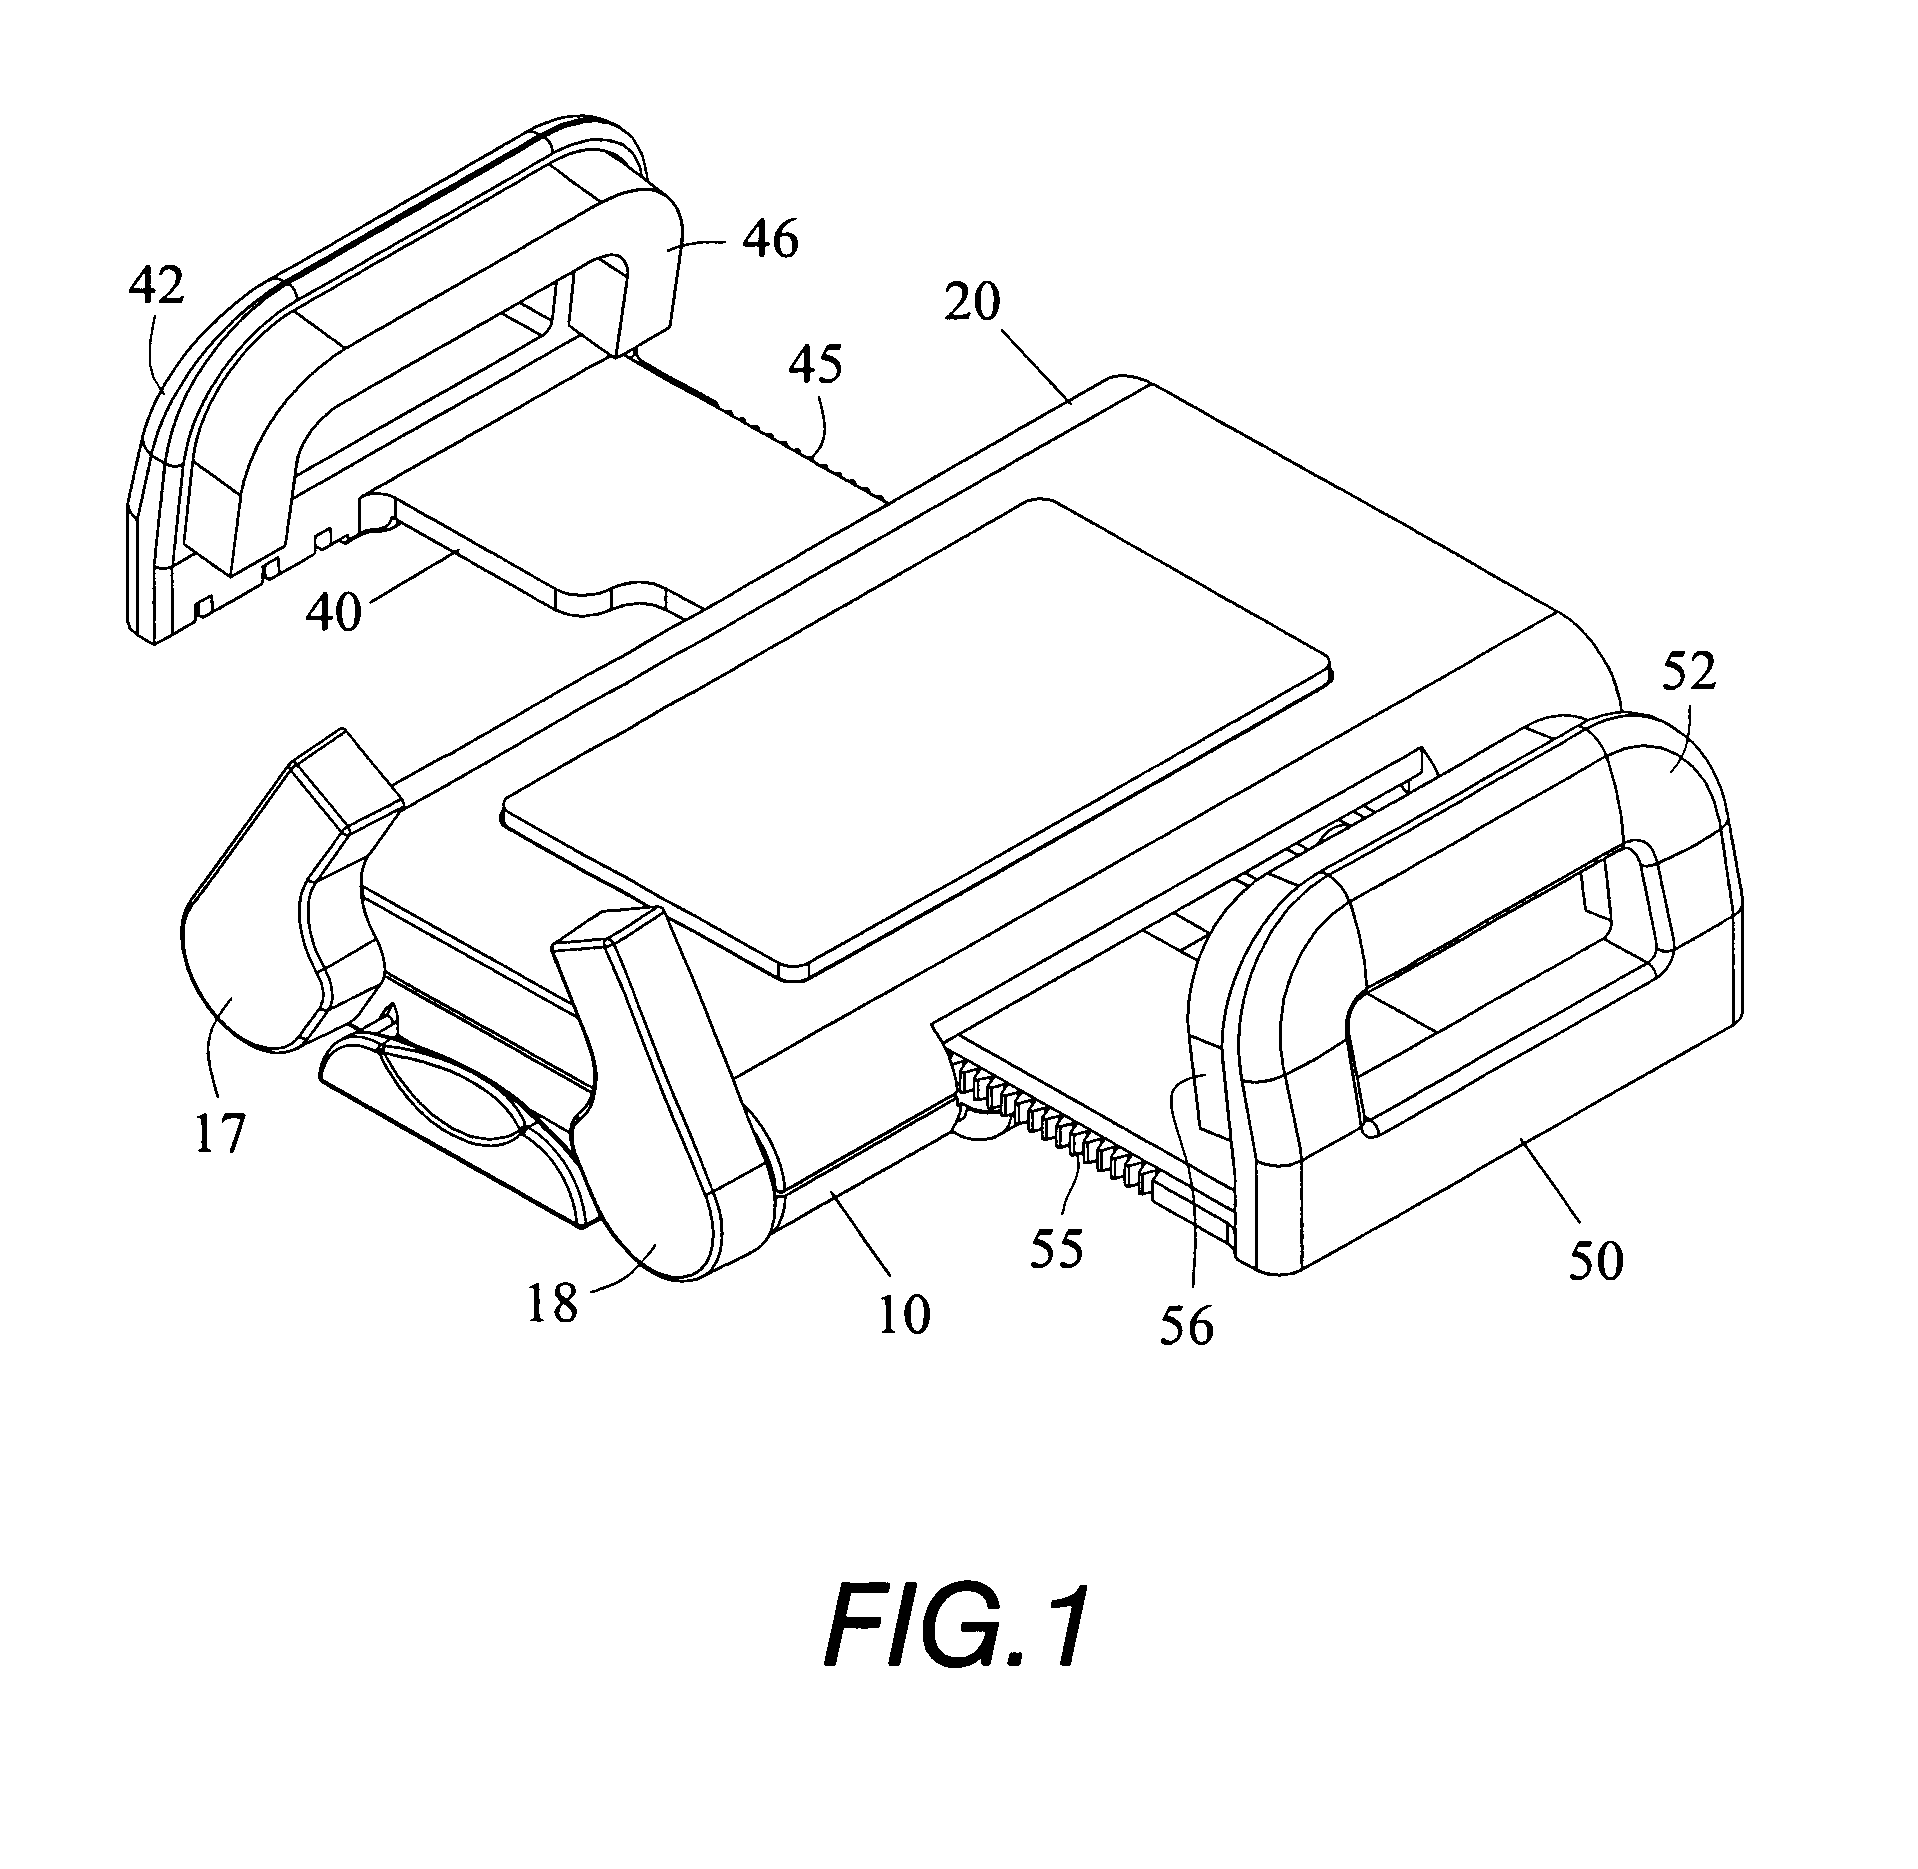 Clamping device with a linking member